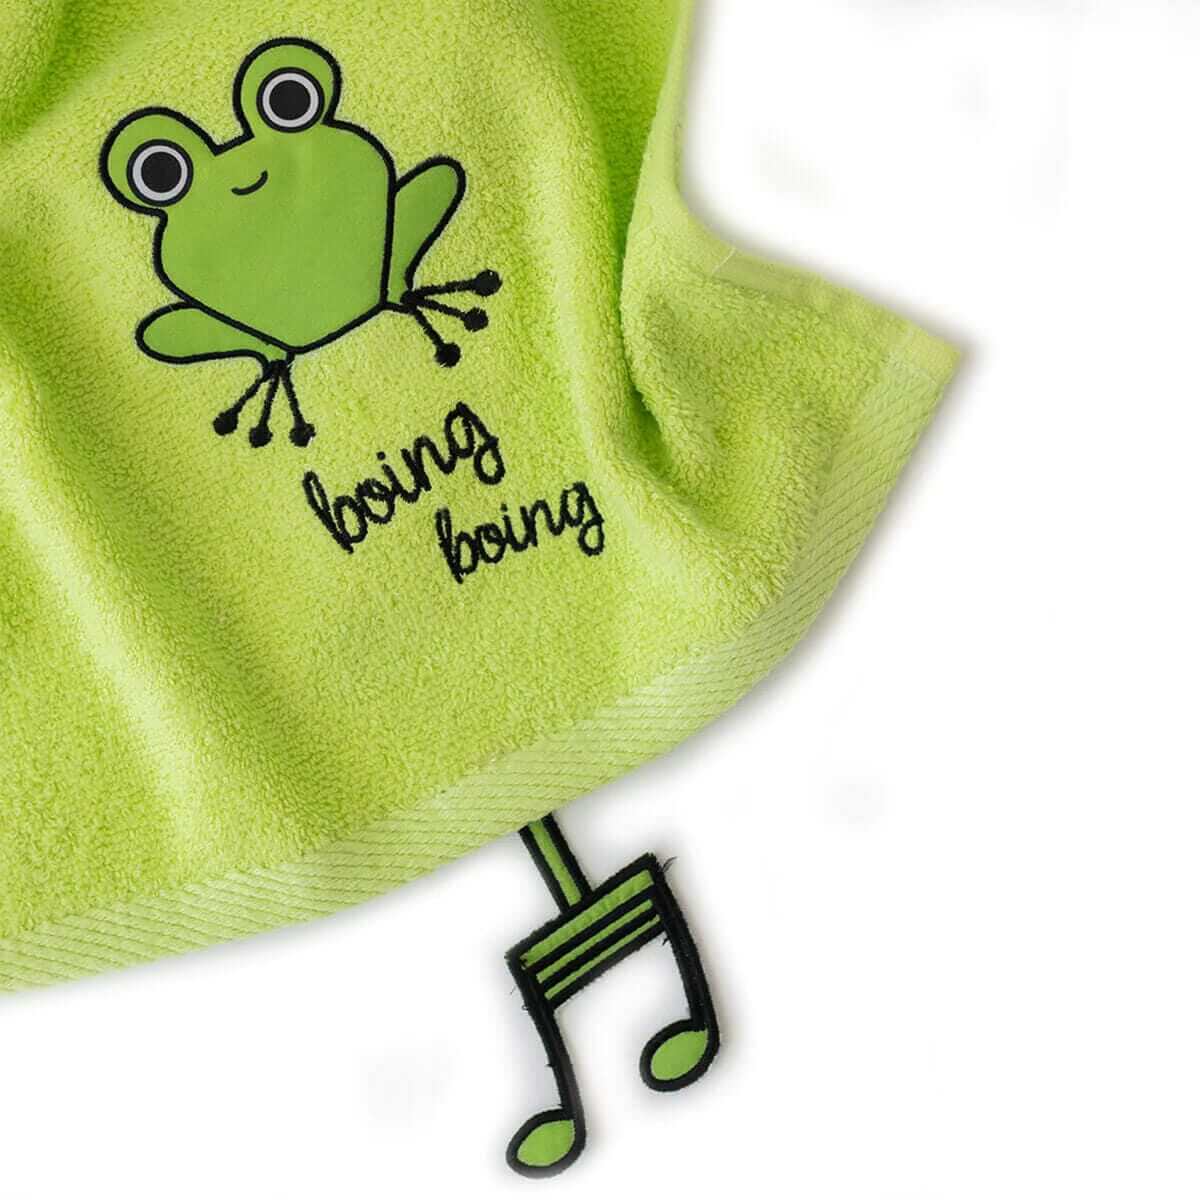 Milk&Moo Cacha Frog Baby Towel Set - 2 Pack for Soft Cuddles